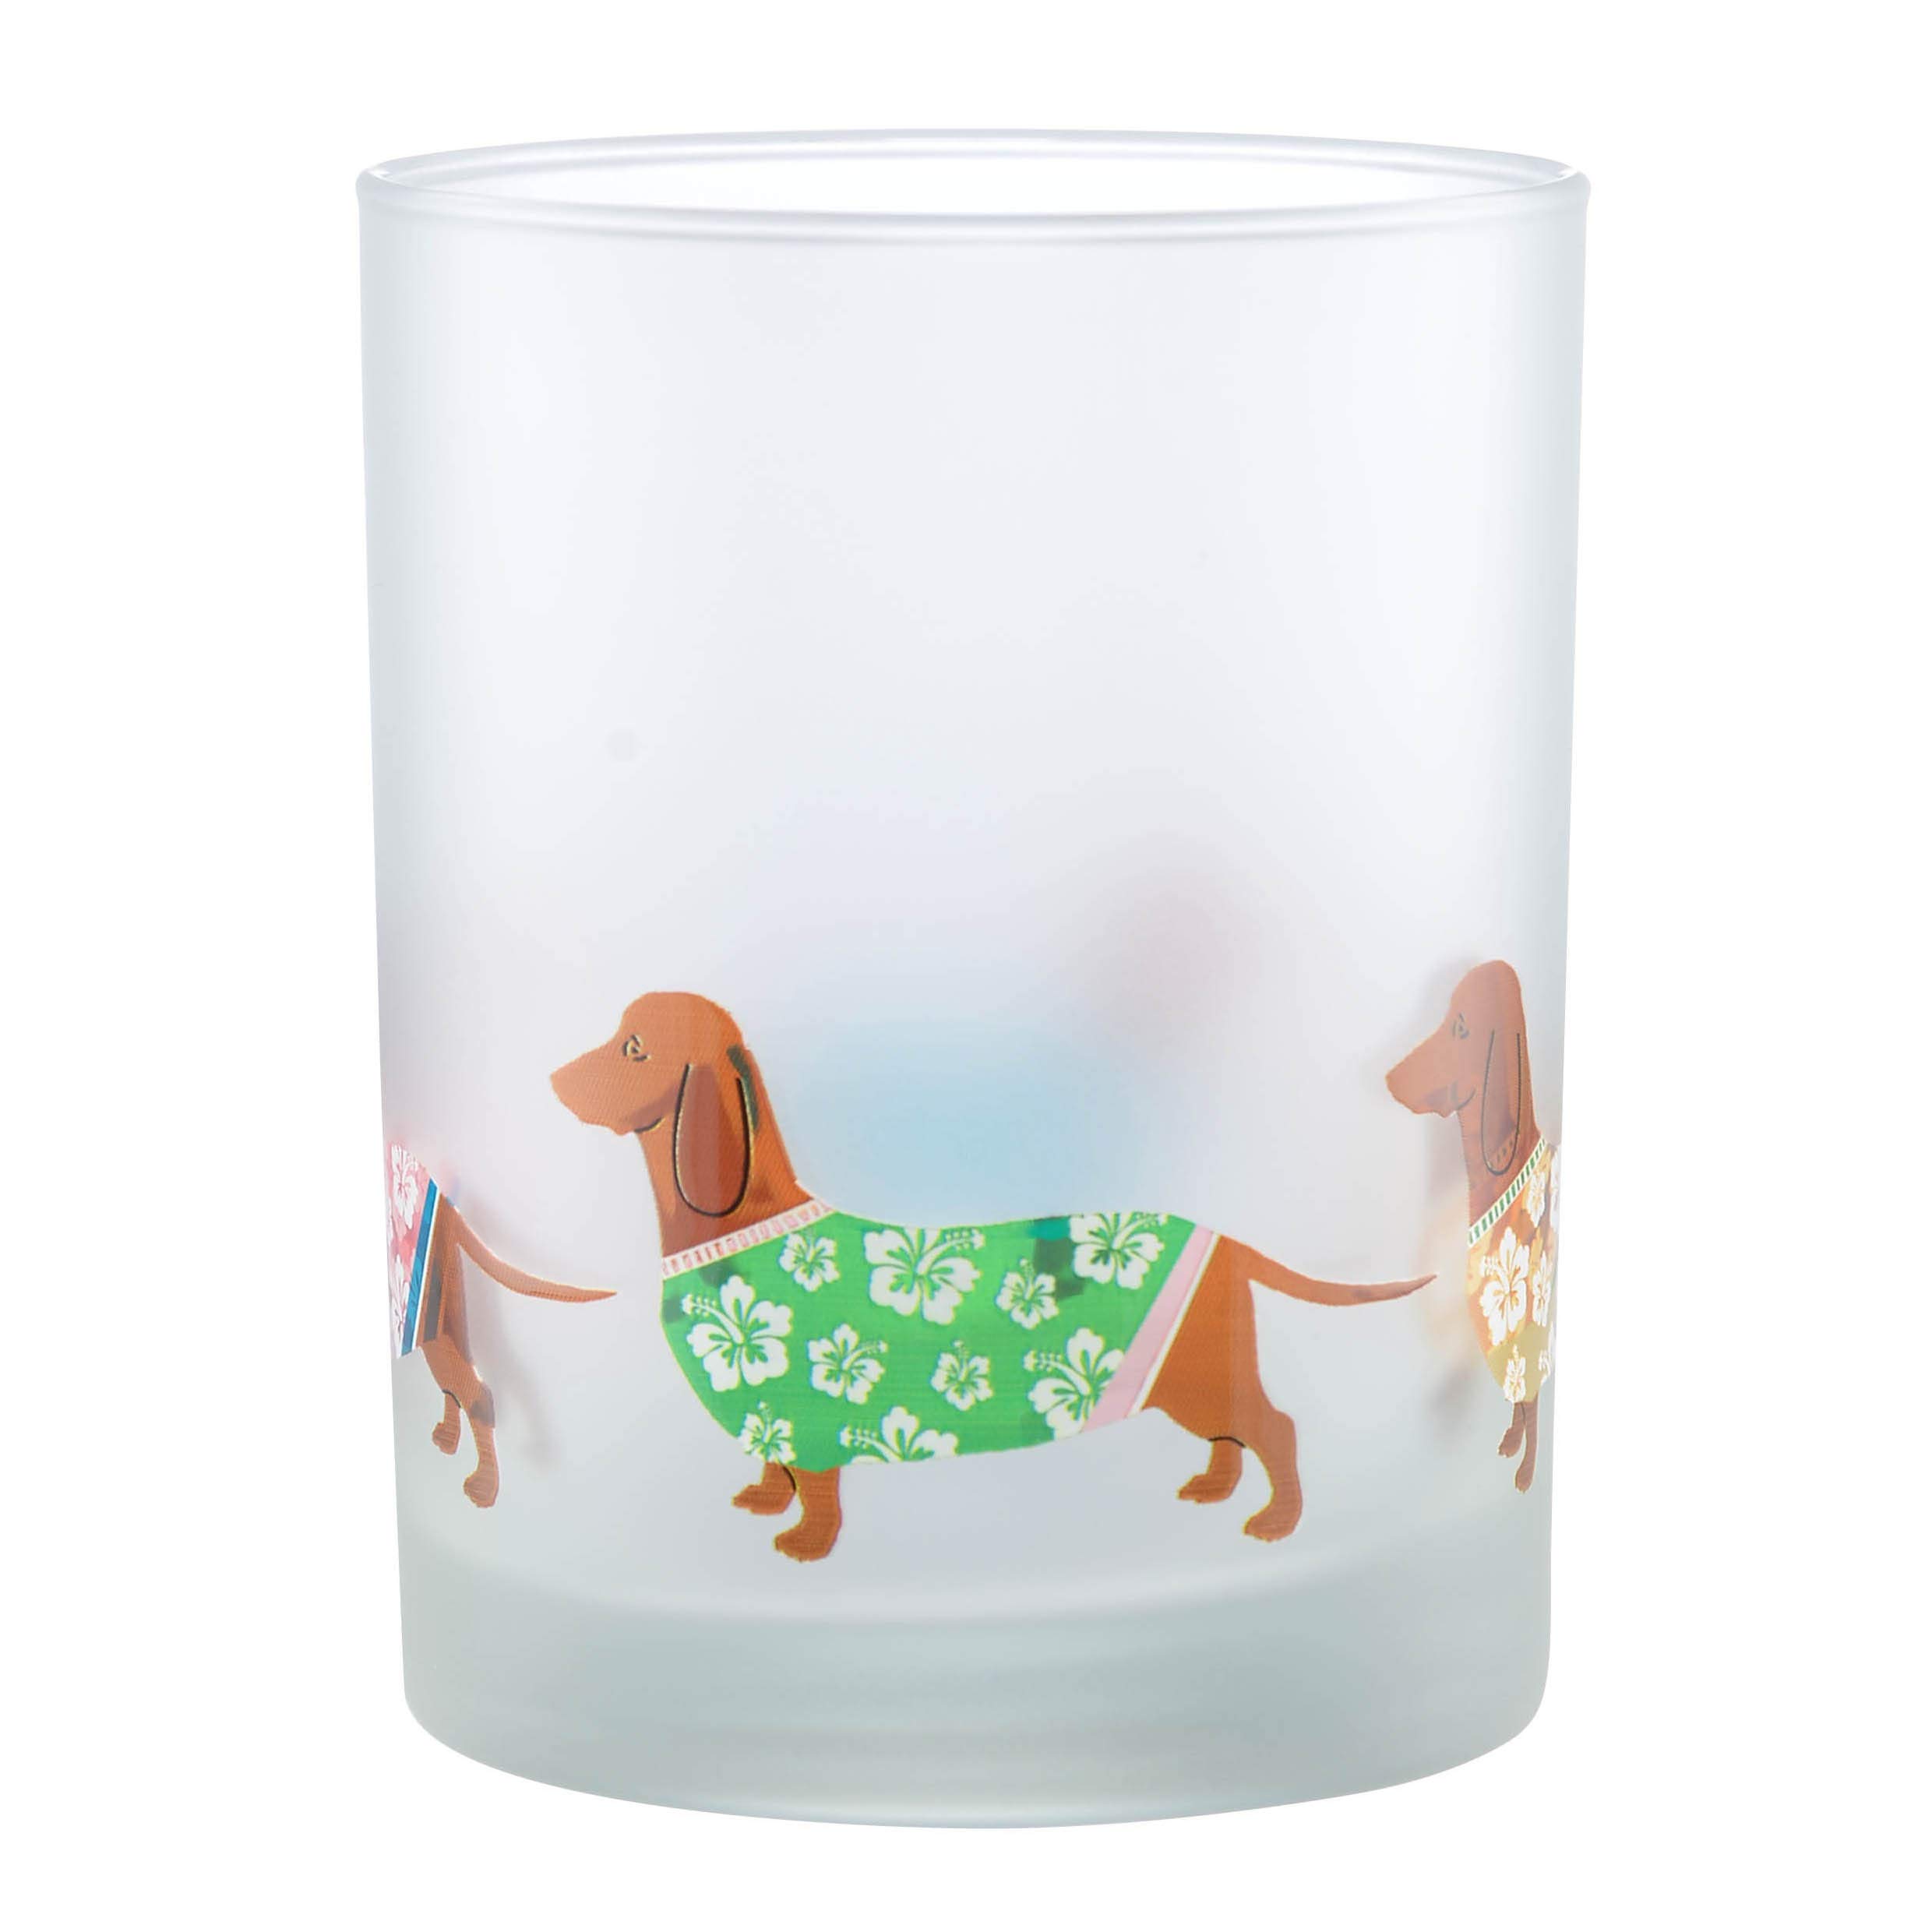 Culver Tropical Decorated Frosted Double Old Fashioned Tumbler Glasses, 13.5-Ounce, Gift Boxed Set of 2 (Luau Dachshunds Dogs)